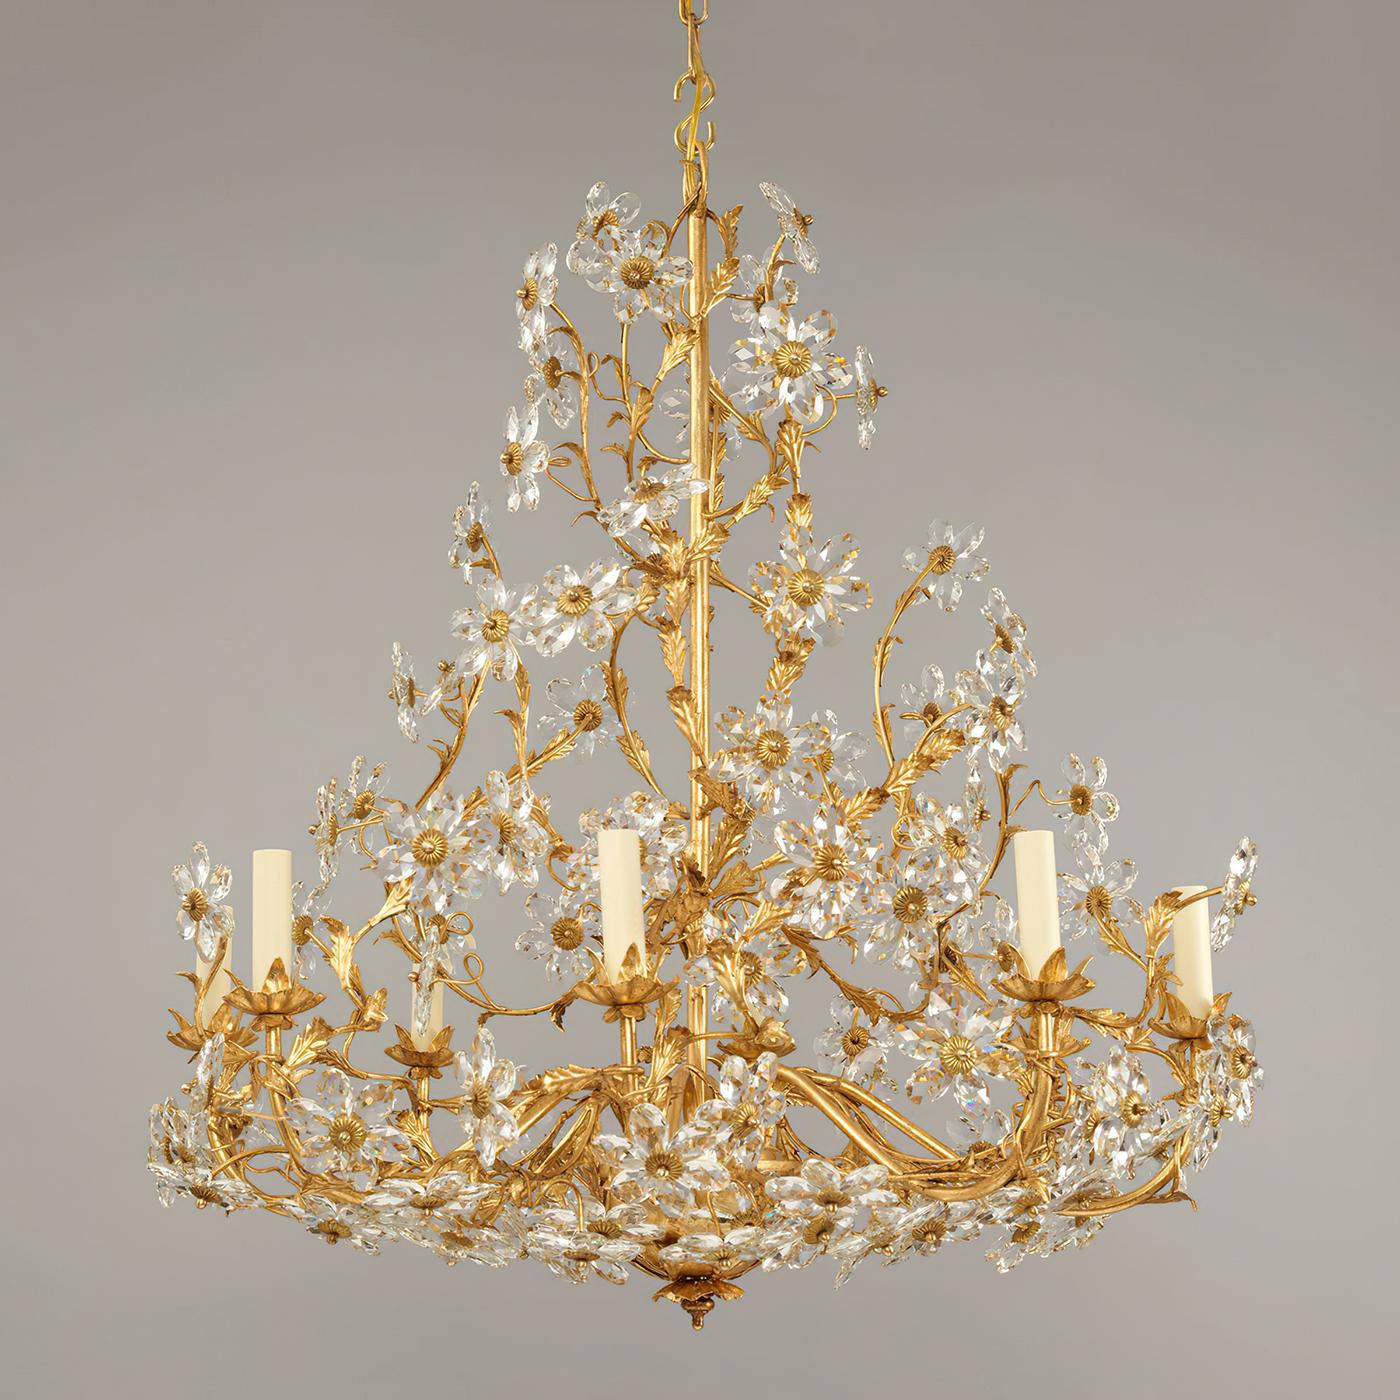 French Rococo gilded eight-light chandelier, the striking contrast of glass daisies with the gilt finish creates an organic feel and texture. Fabricated from a painted steel frame, with a patinated gilt finish.

Dimensions: 29